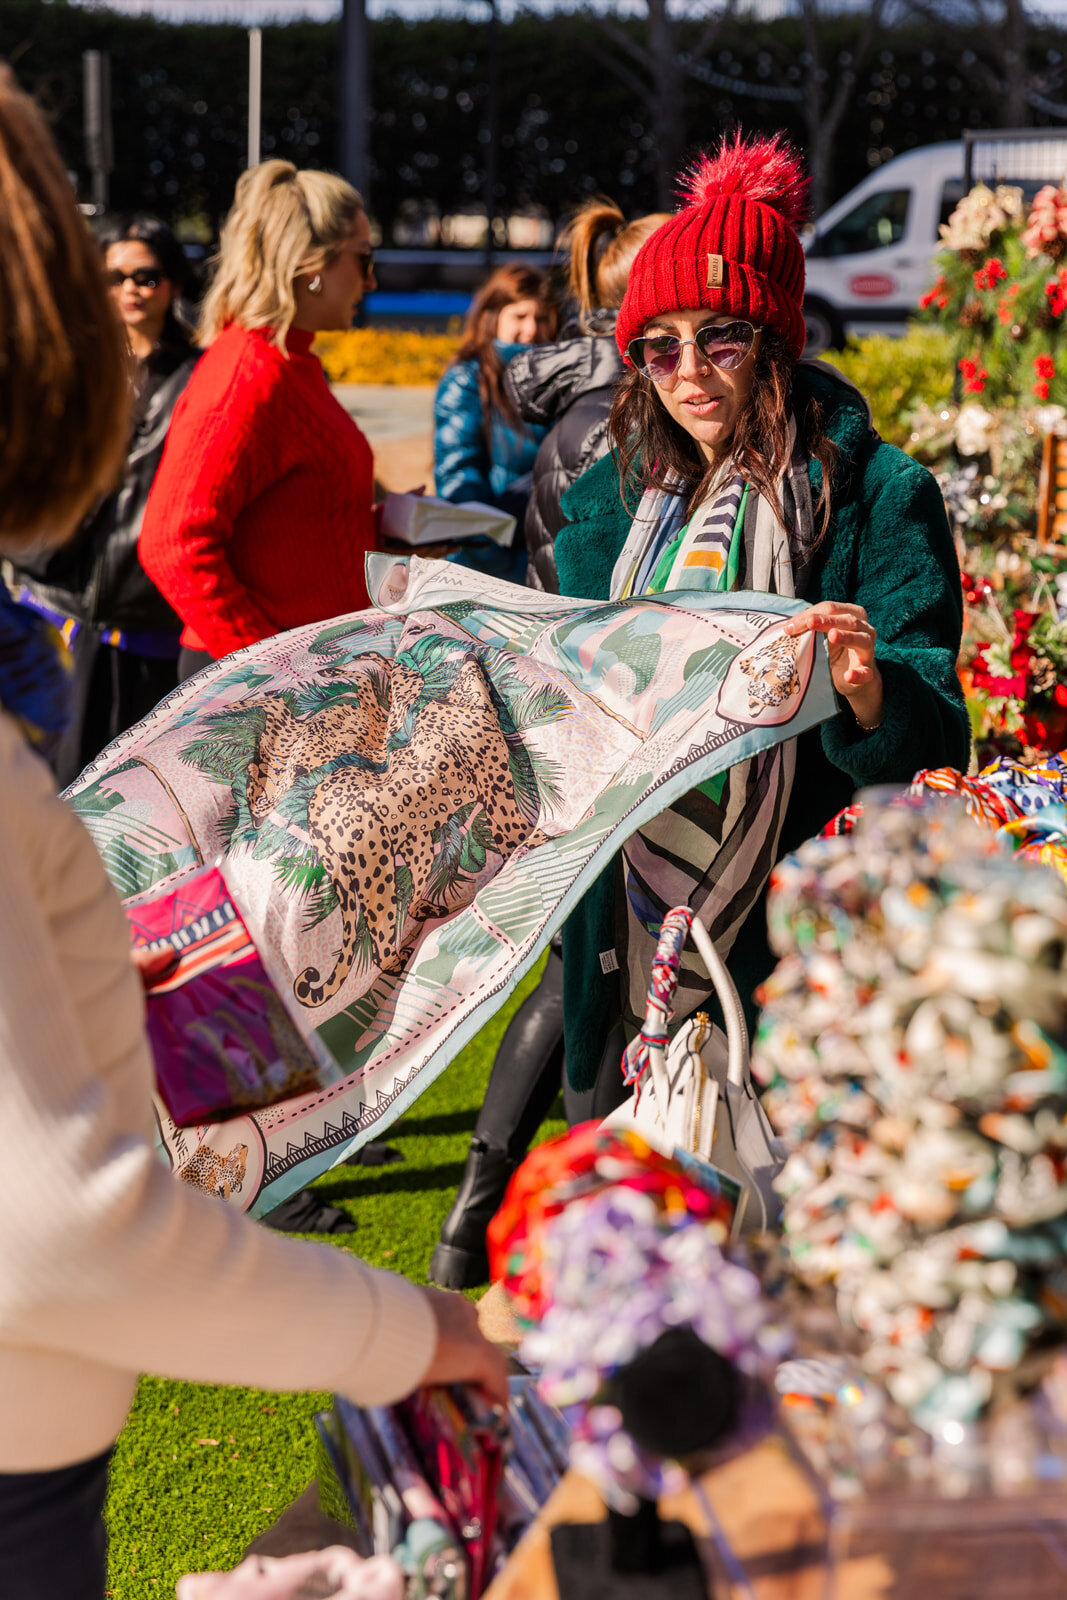 scarf seller showing her products during Atlanta makers market by event photographer Laure Photography